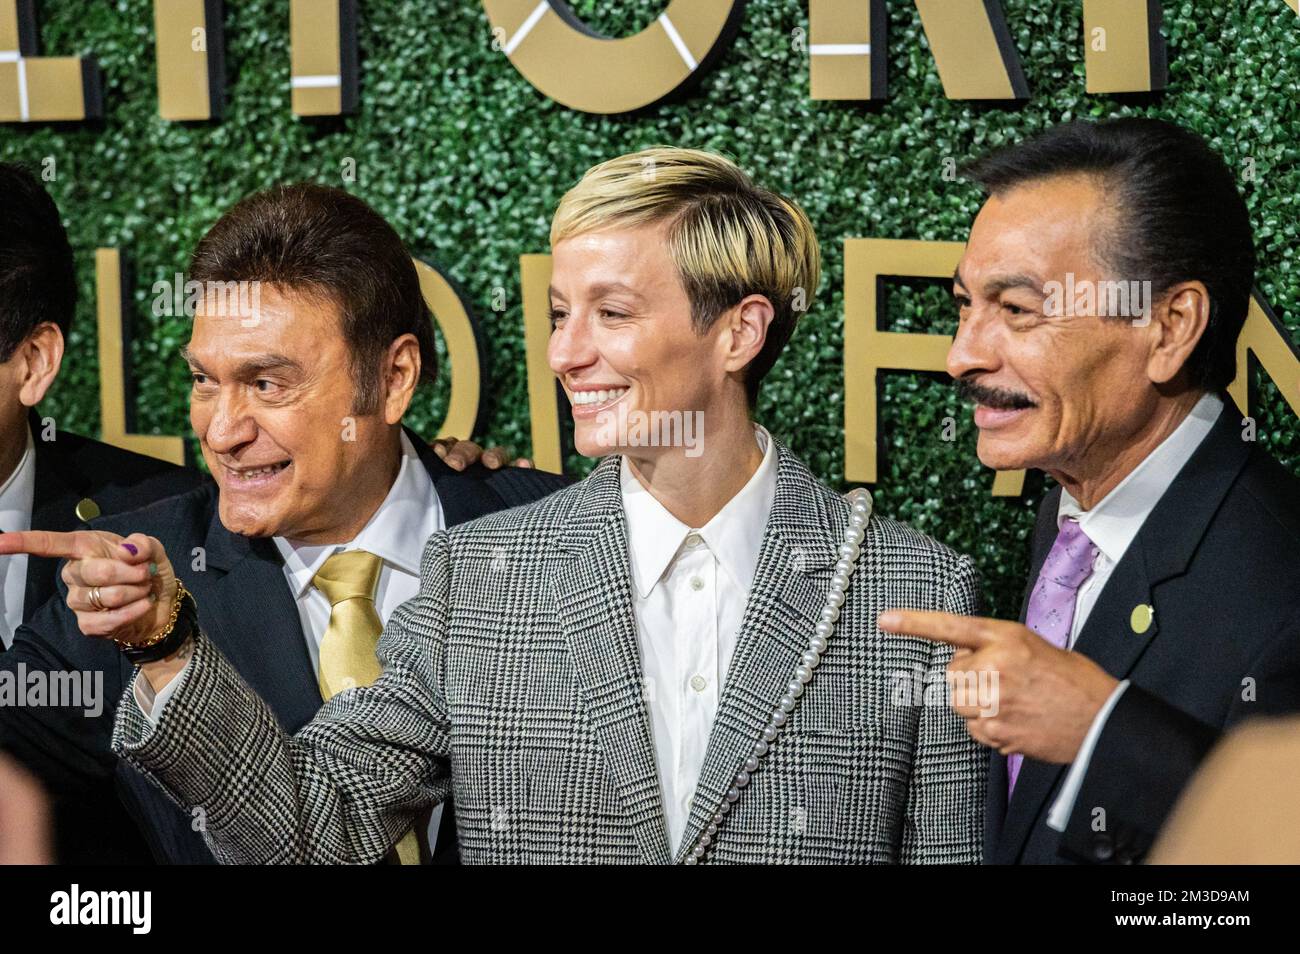 Soccer star Megan Rapinoe poses with members of the band Los Tigres del Norte. All were inducted into the state's Hall of Fame at the California Museu Stock Photo